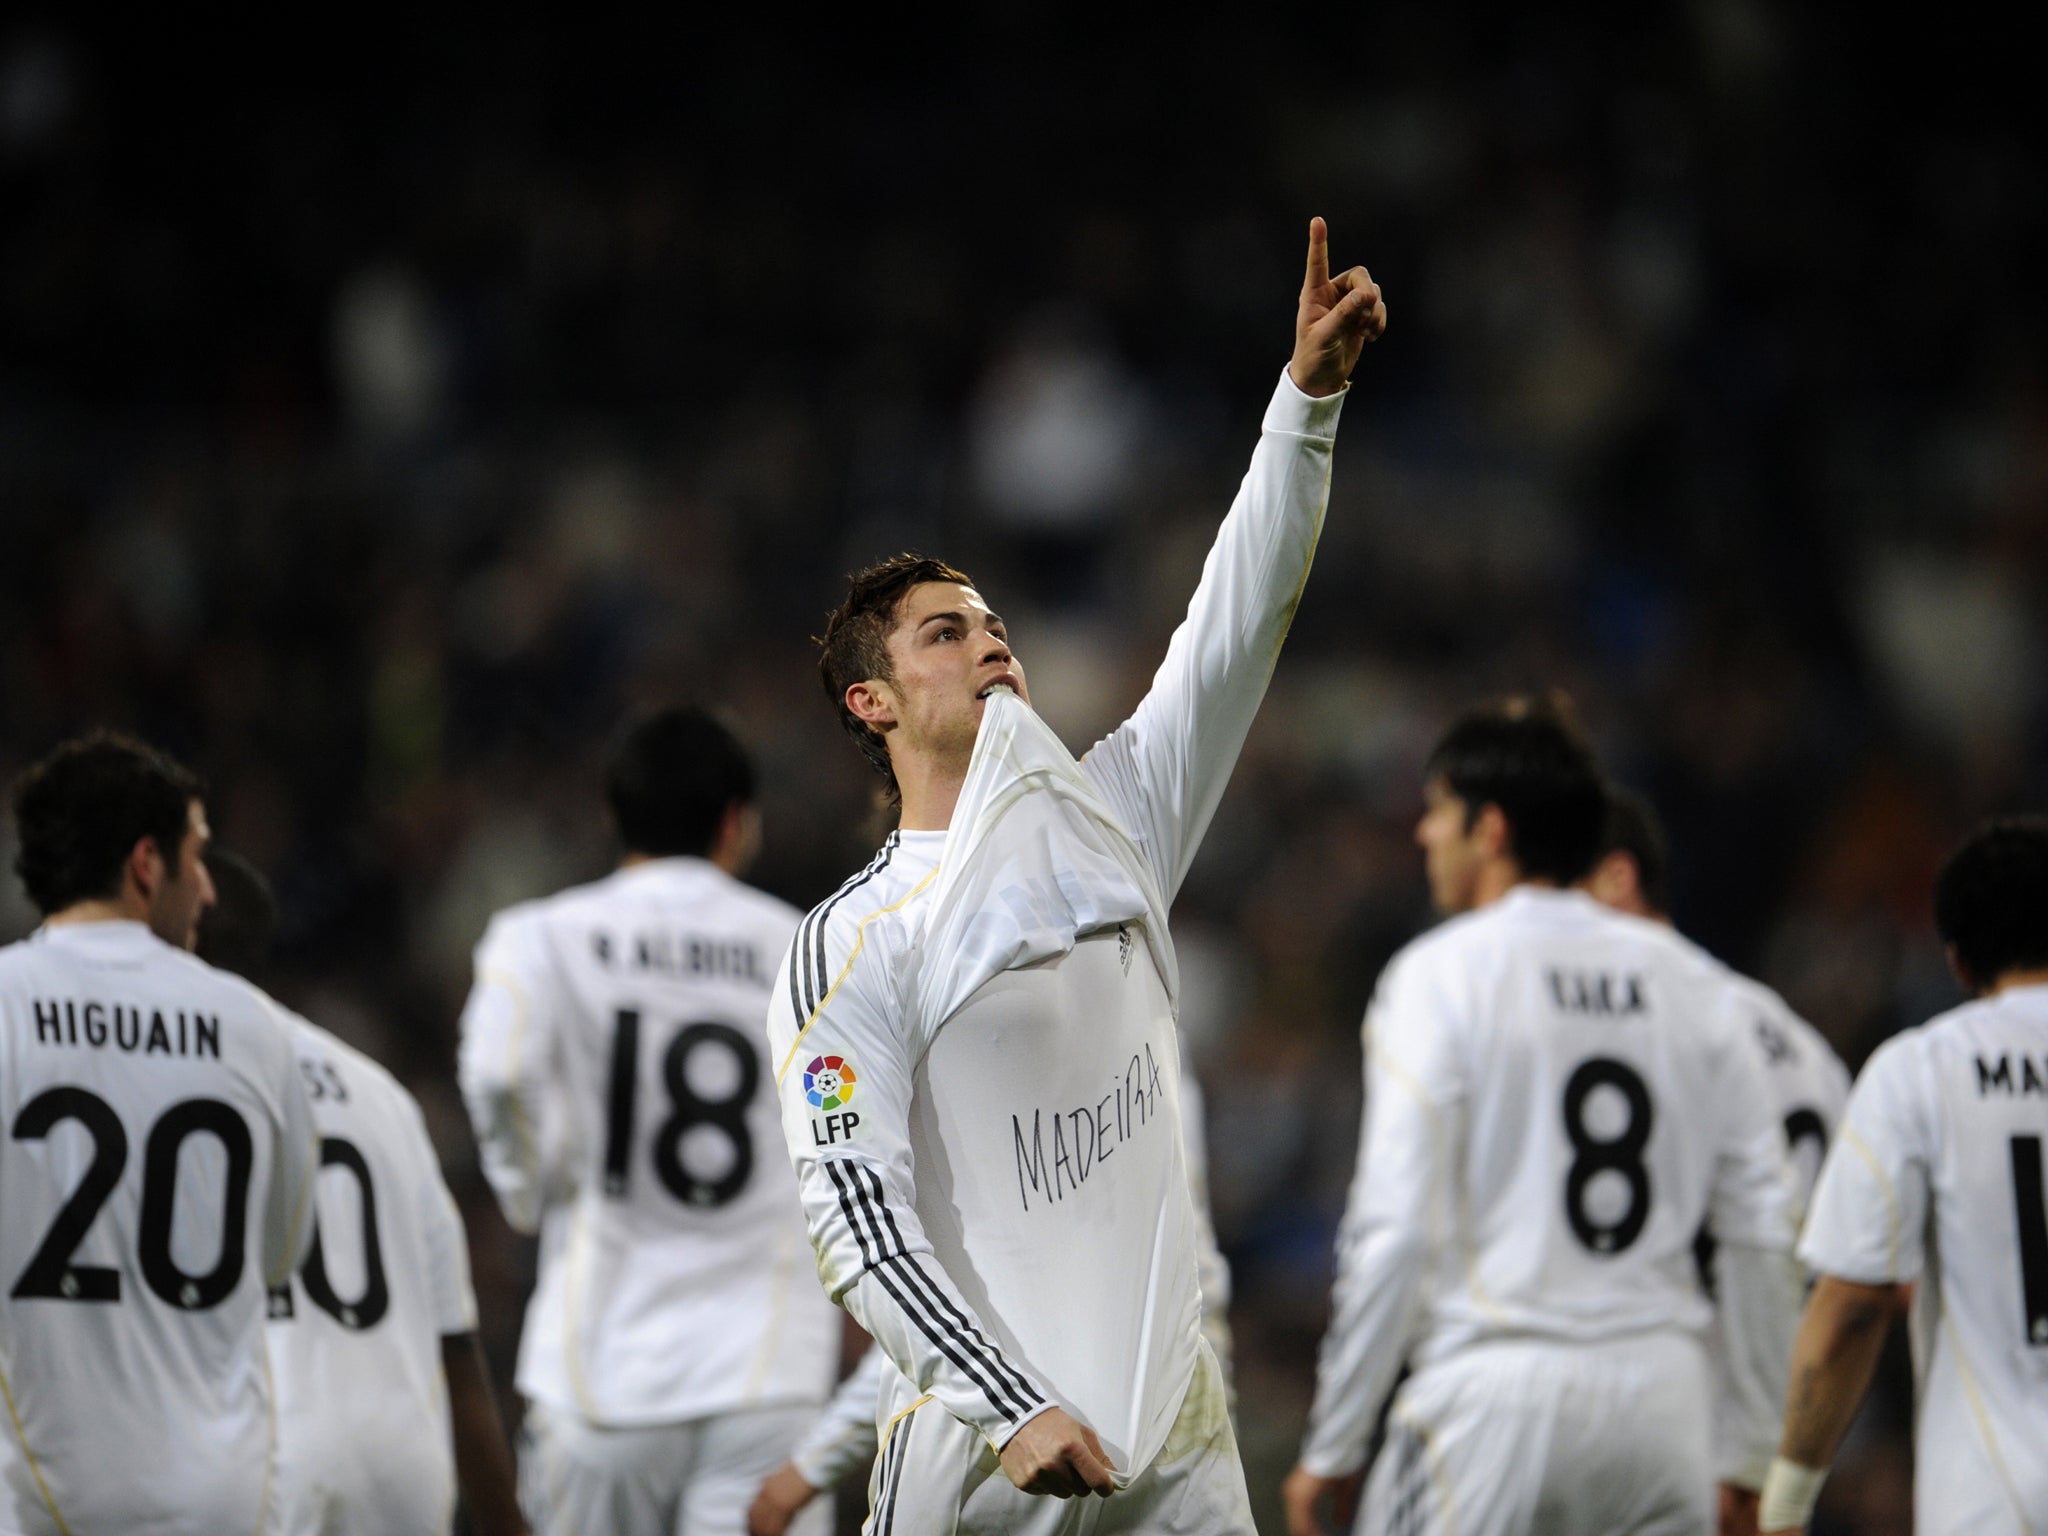 Real Madrid's Portuguese forward Cristiano Ronaldo lifts his jersey to display the name of the island Madeira, written on his shirt, as he celebrates scoring against Villarreal